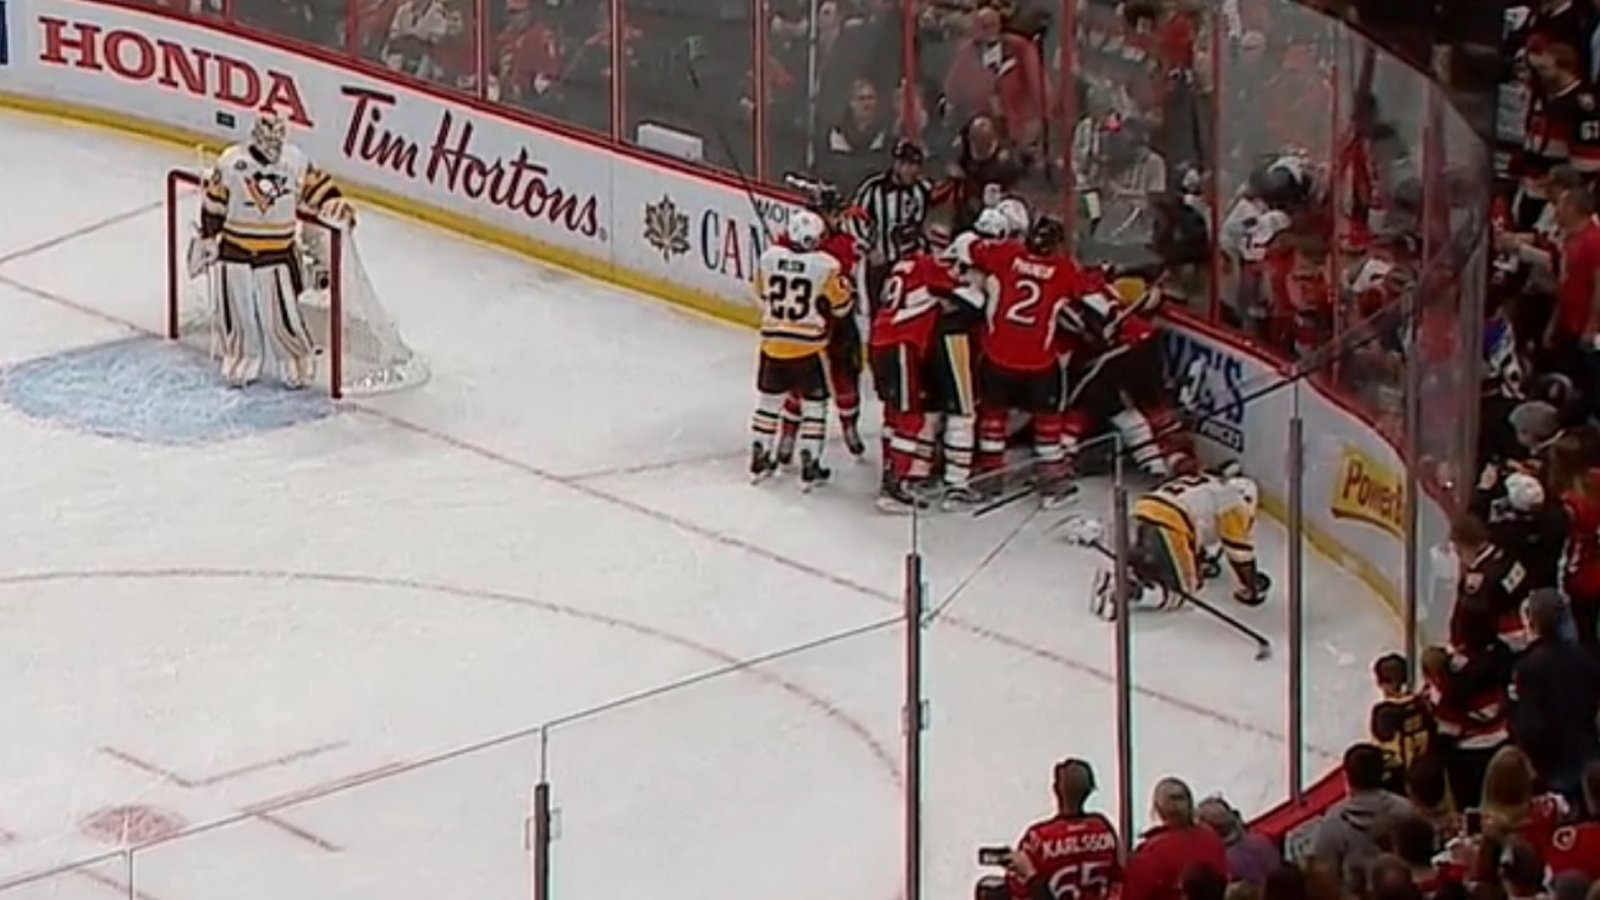 Bobby Ryan destroys Penguins defenseman moments after refs fail to call a penalty. 